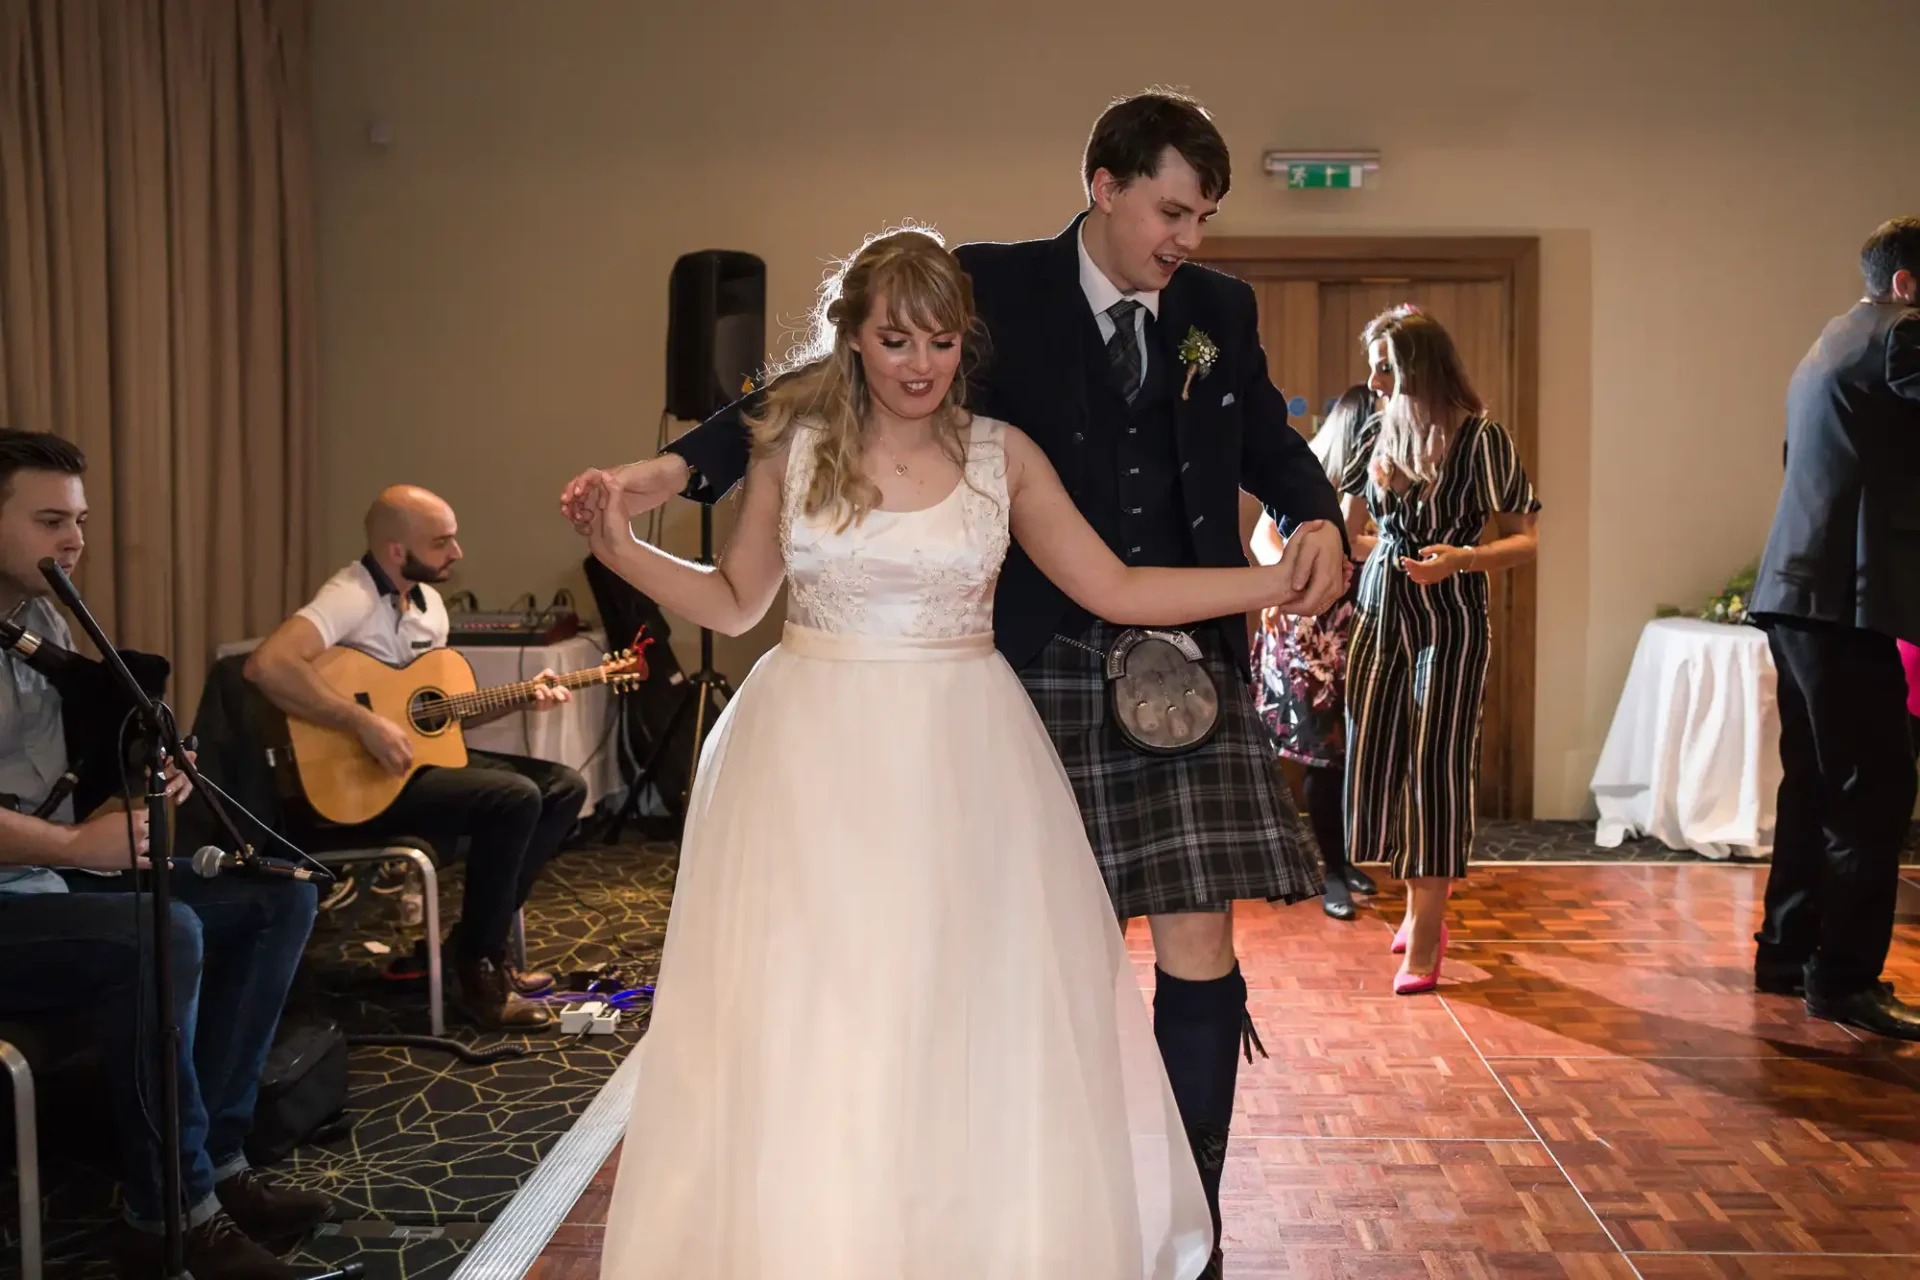 A bride and groom joyfully dance together in a ballroom, with a live band playing in the background.